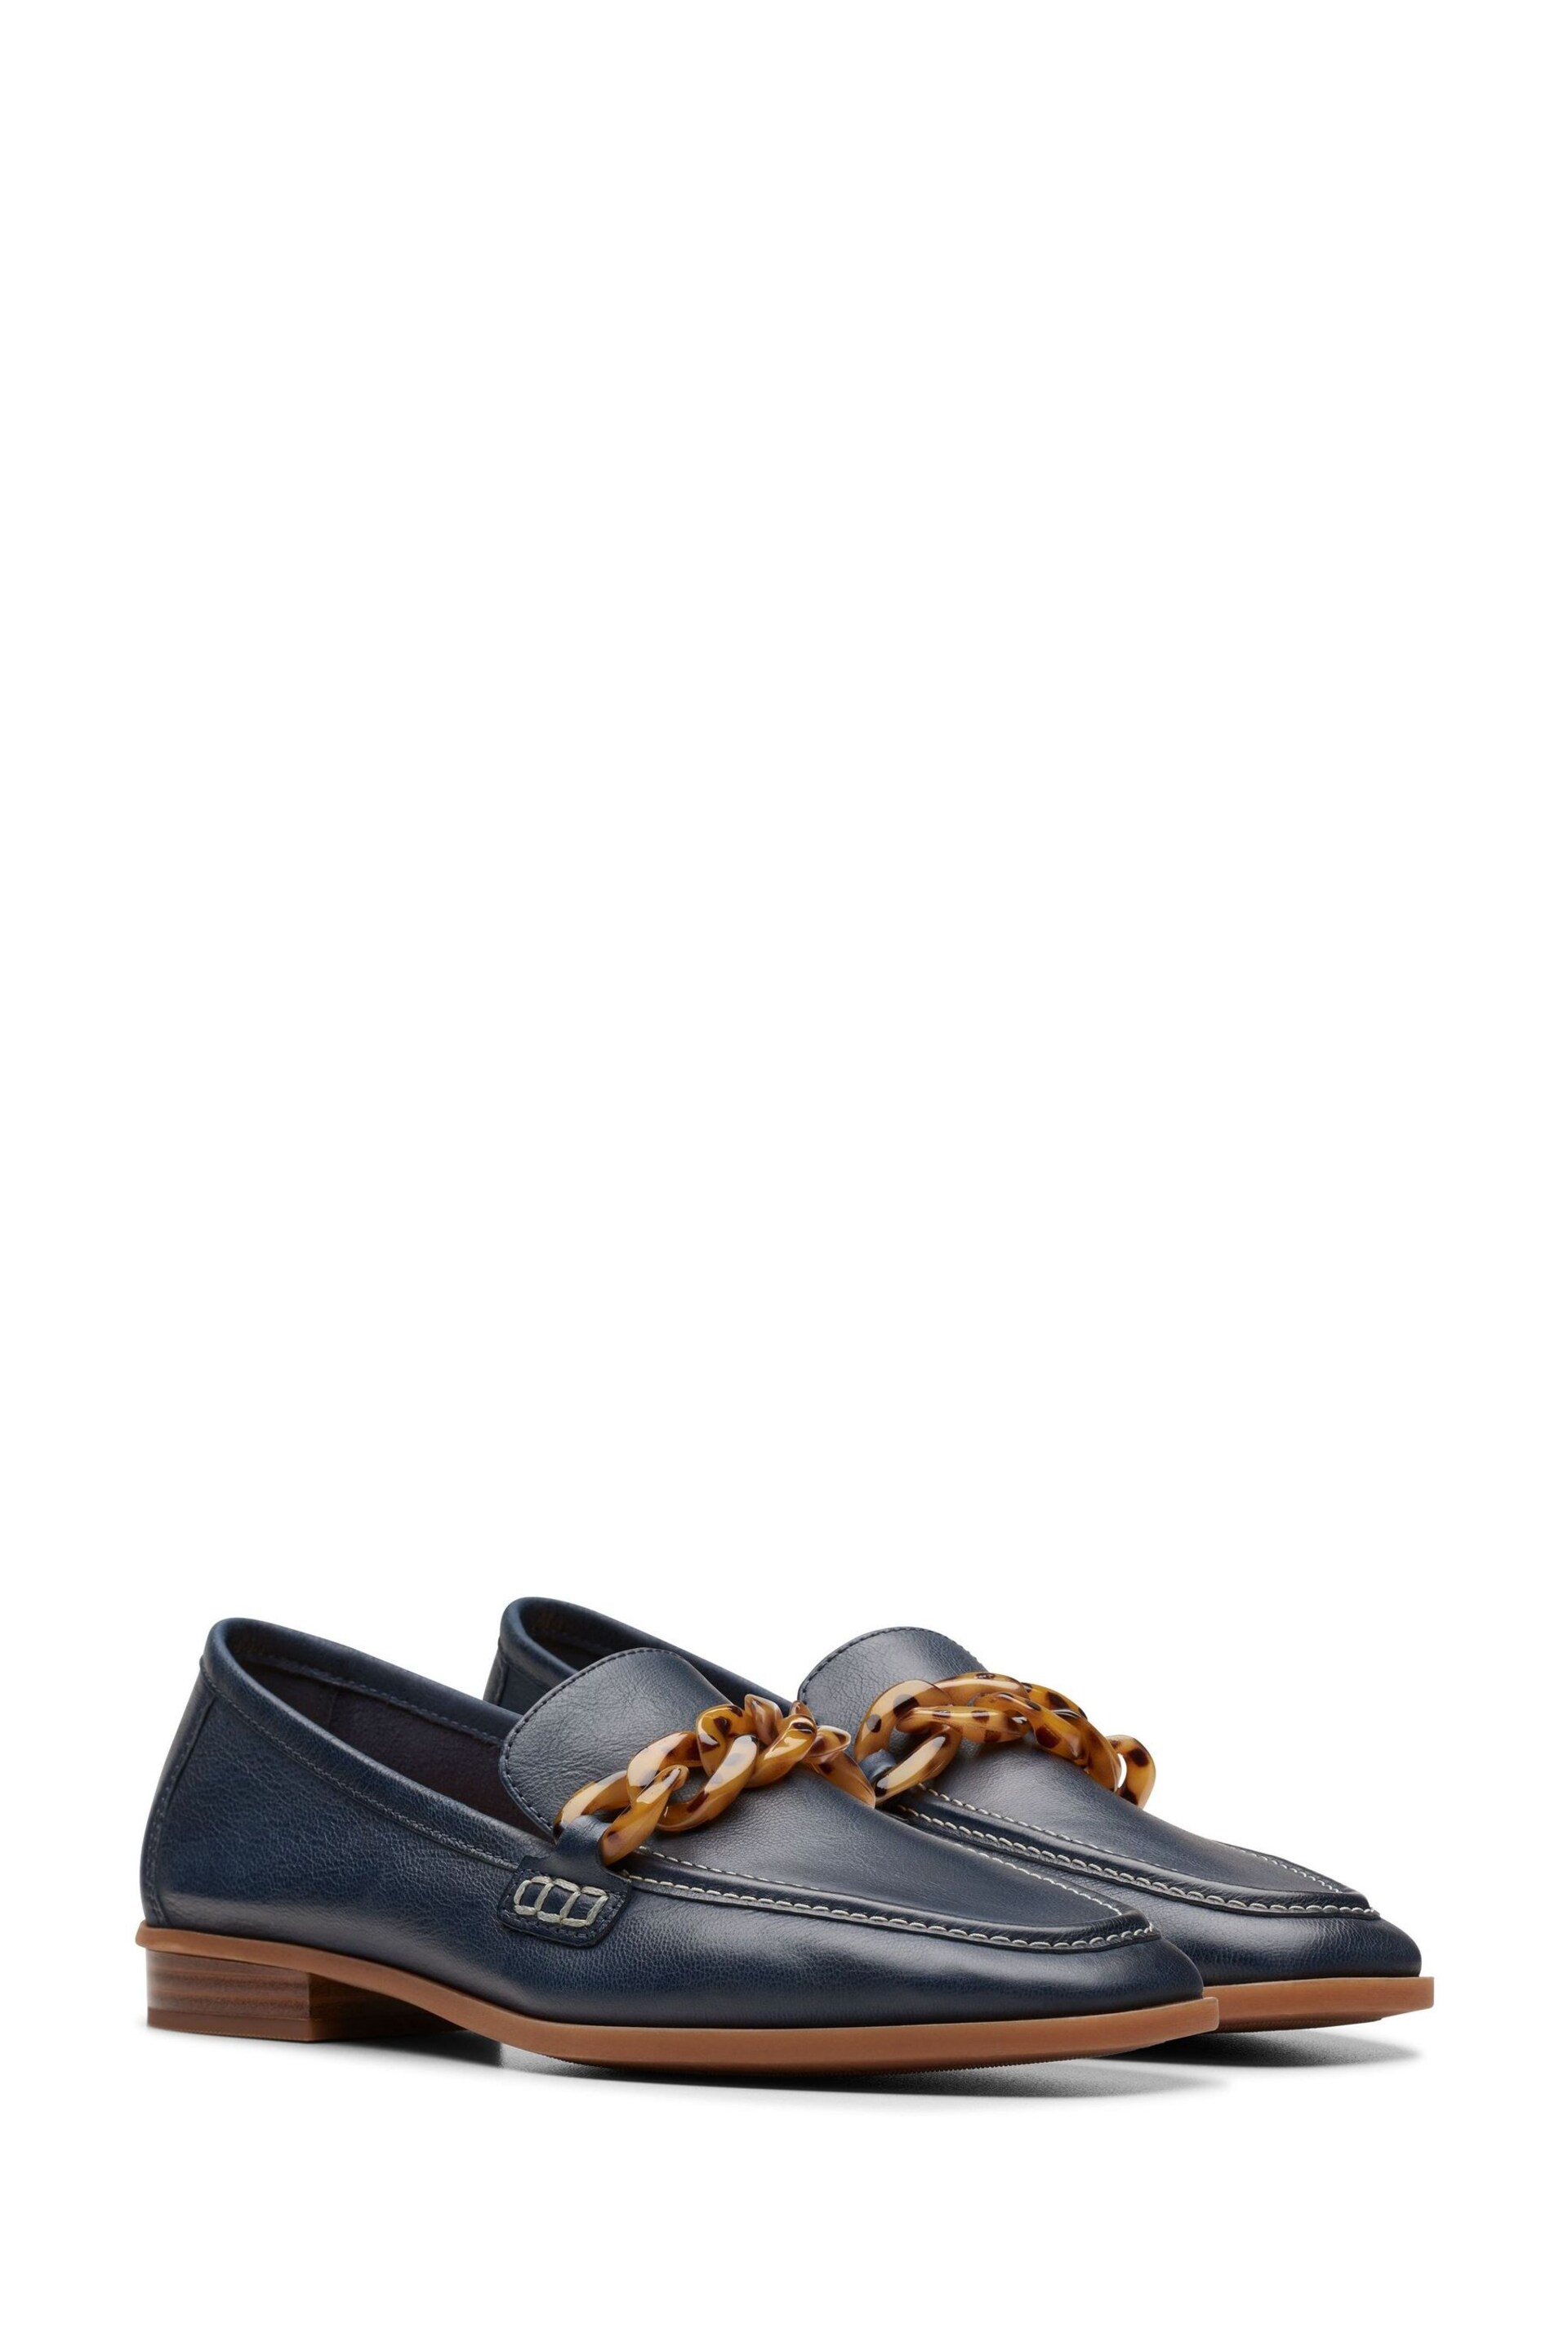 Clarks Blue Leather Sarafyna Iris Shoes - Image 4 of 8